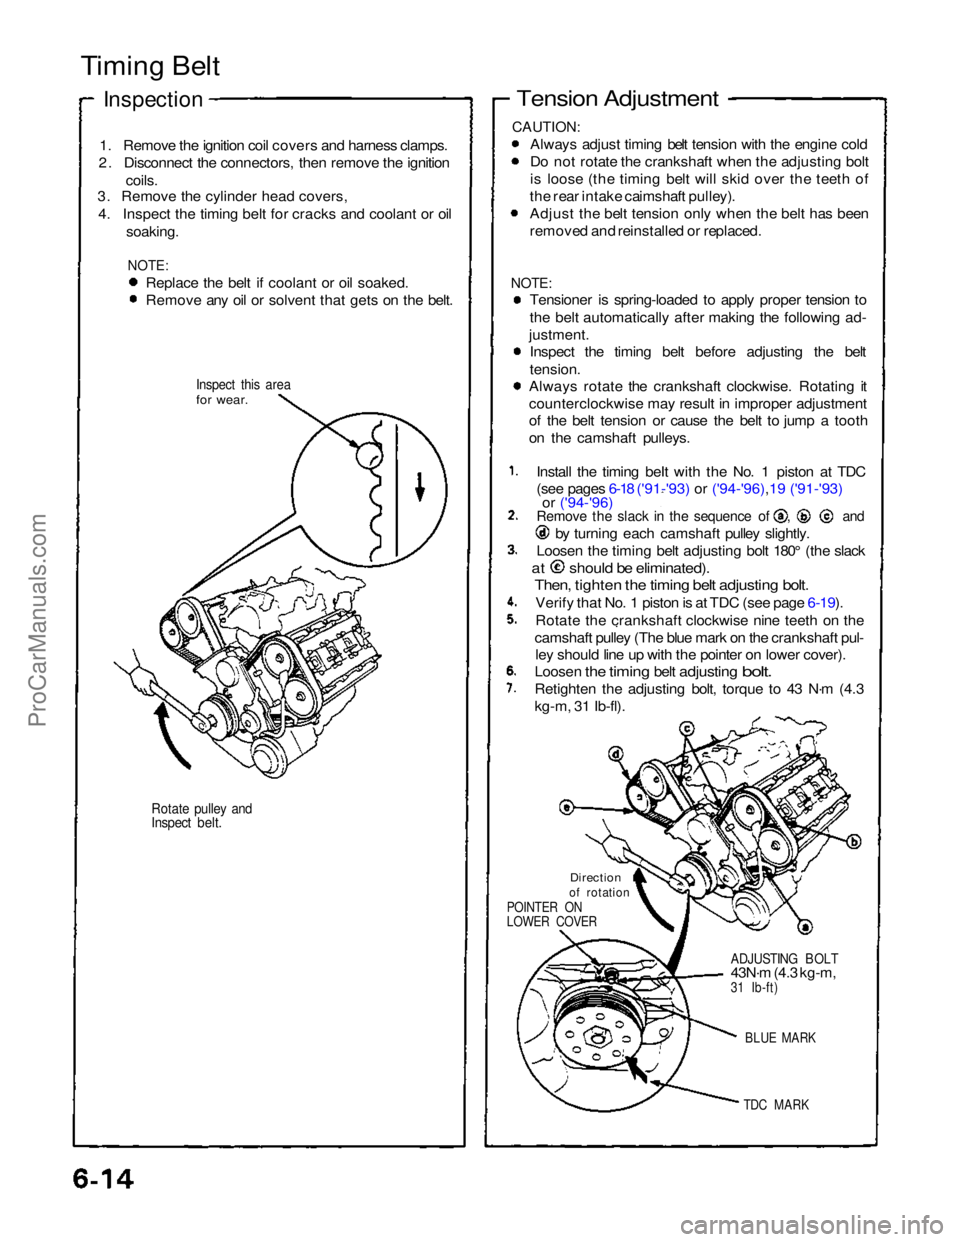 ACURA NSX 1991  Service Repair Manual 
Timing Belt

Inspection

1.   Remove the ignition coil covers and harness clamps.
2.   Disconnect the connectors, then remove the ignition
coils.
3. Remove the cylinder head covers,
4.   Inspect the 